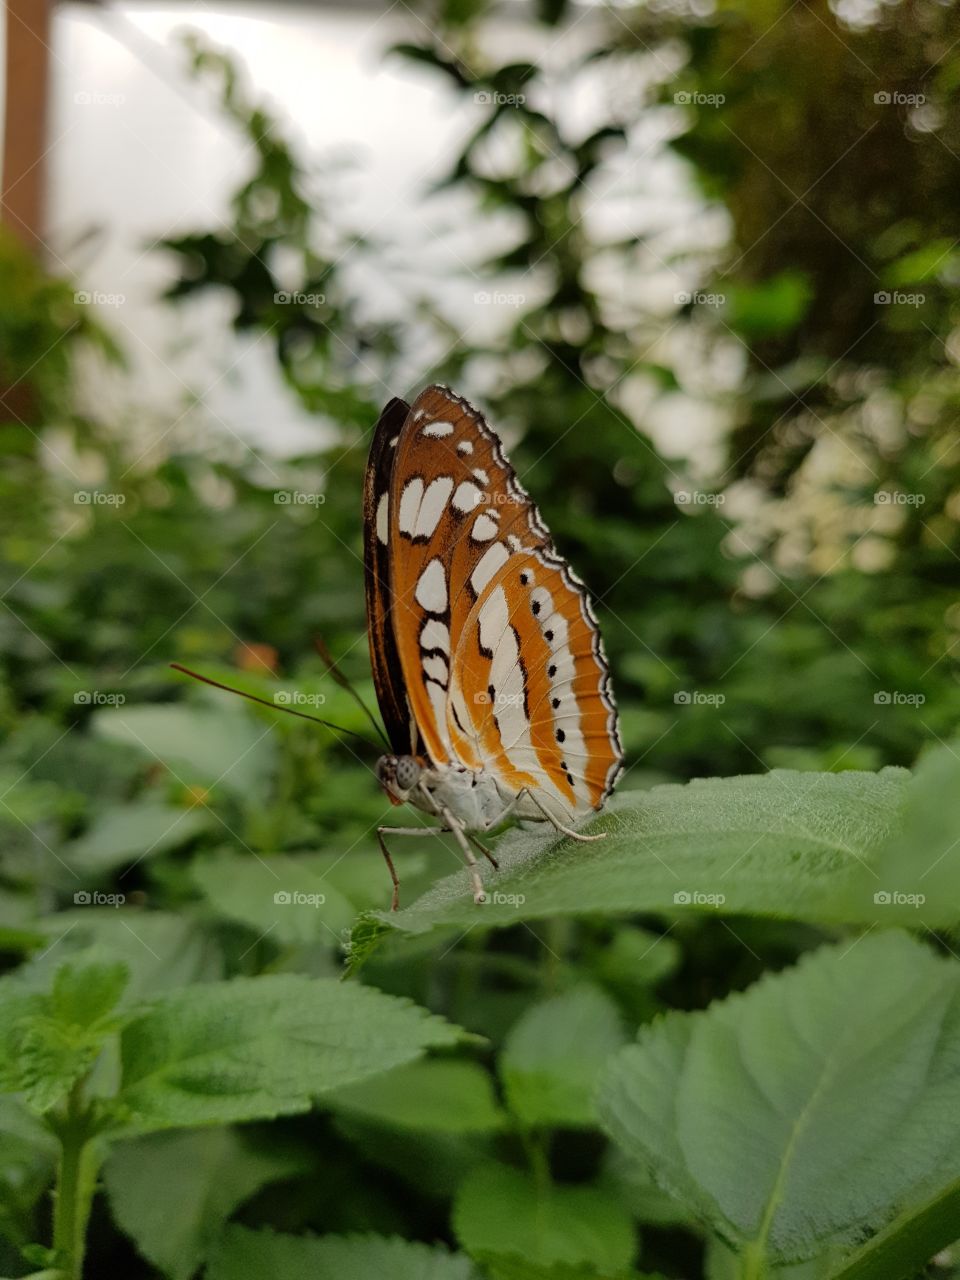 beautiful butterfly, fascinating creatures